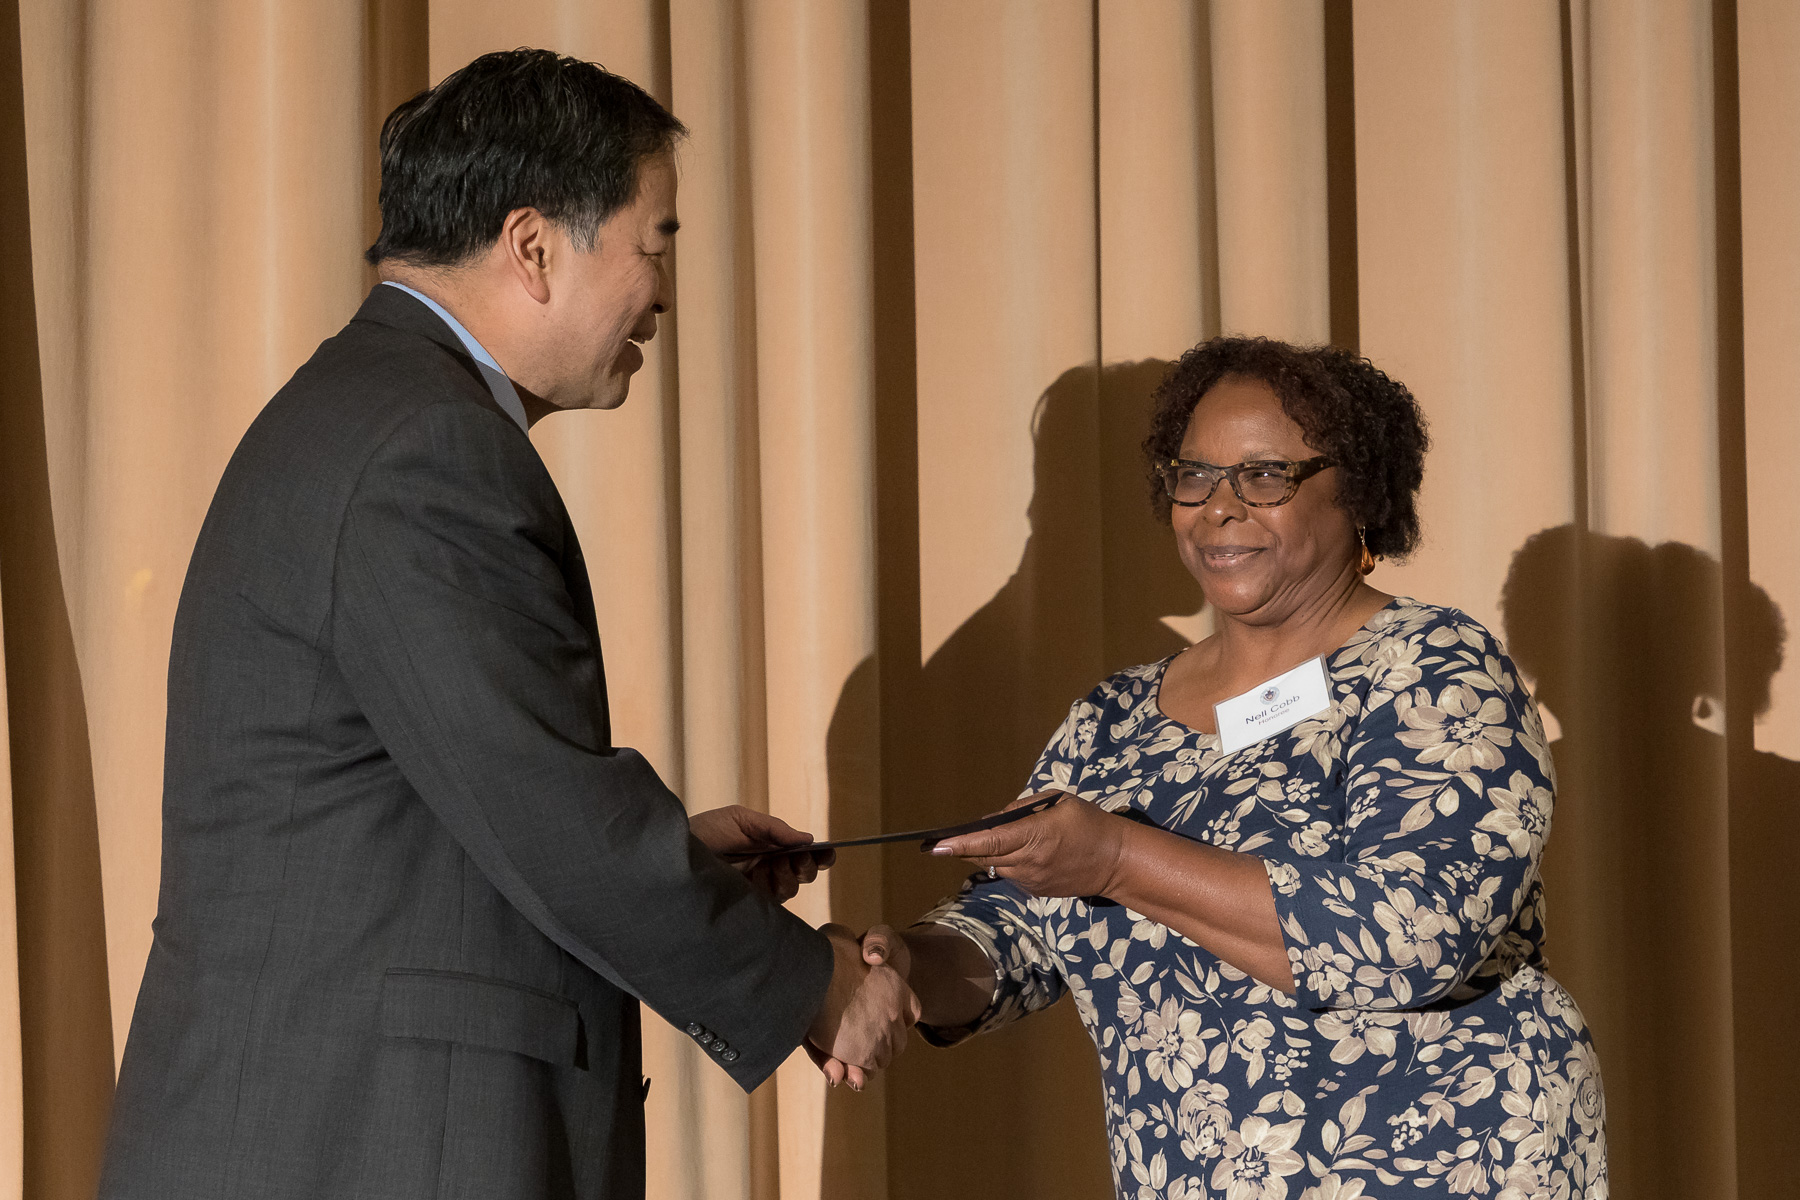 Nell Cobb, right, with A. Gabriel Esteban, Ph.D., president, as faculty and staff members are inducted into DePaul University's 25 Year Club, Tuesday, Nov. 13, 2018, at the Lincoln Park Student Center. Employees celebrating their 25th work anniversary were honored at the luncheon with their colleagues and will have their names added to plaques located on the Loop and Lincoln Park Campuses. (DePaul University/Jeff Carrion)